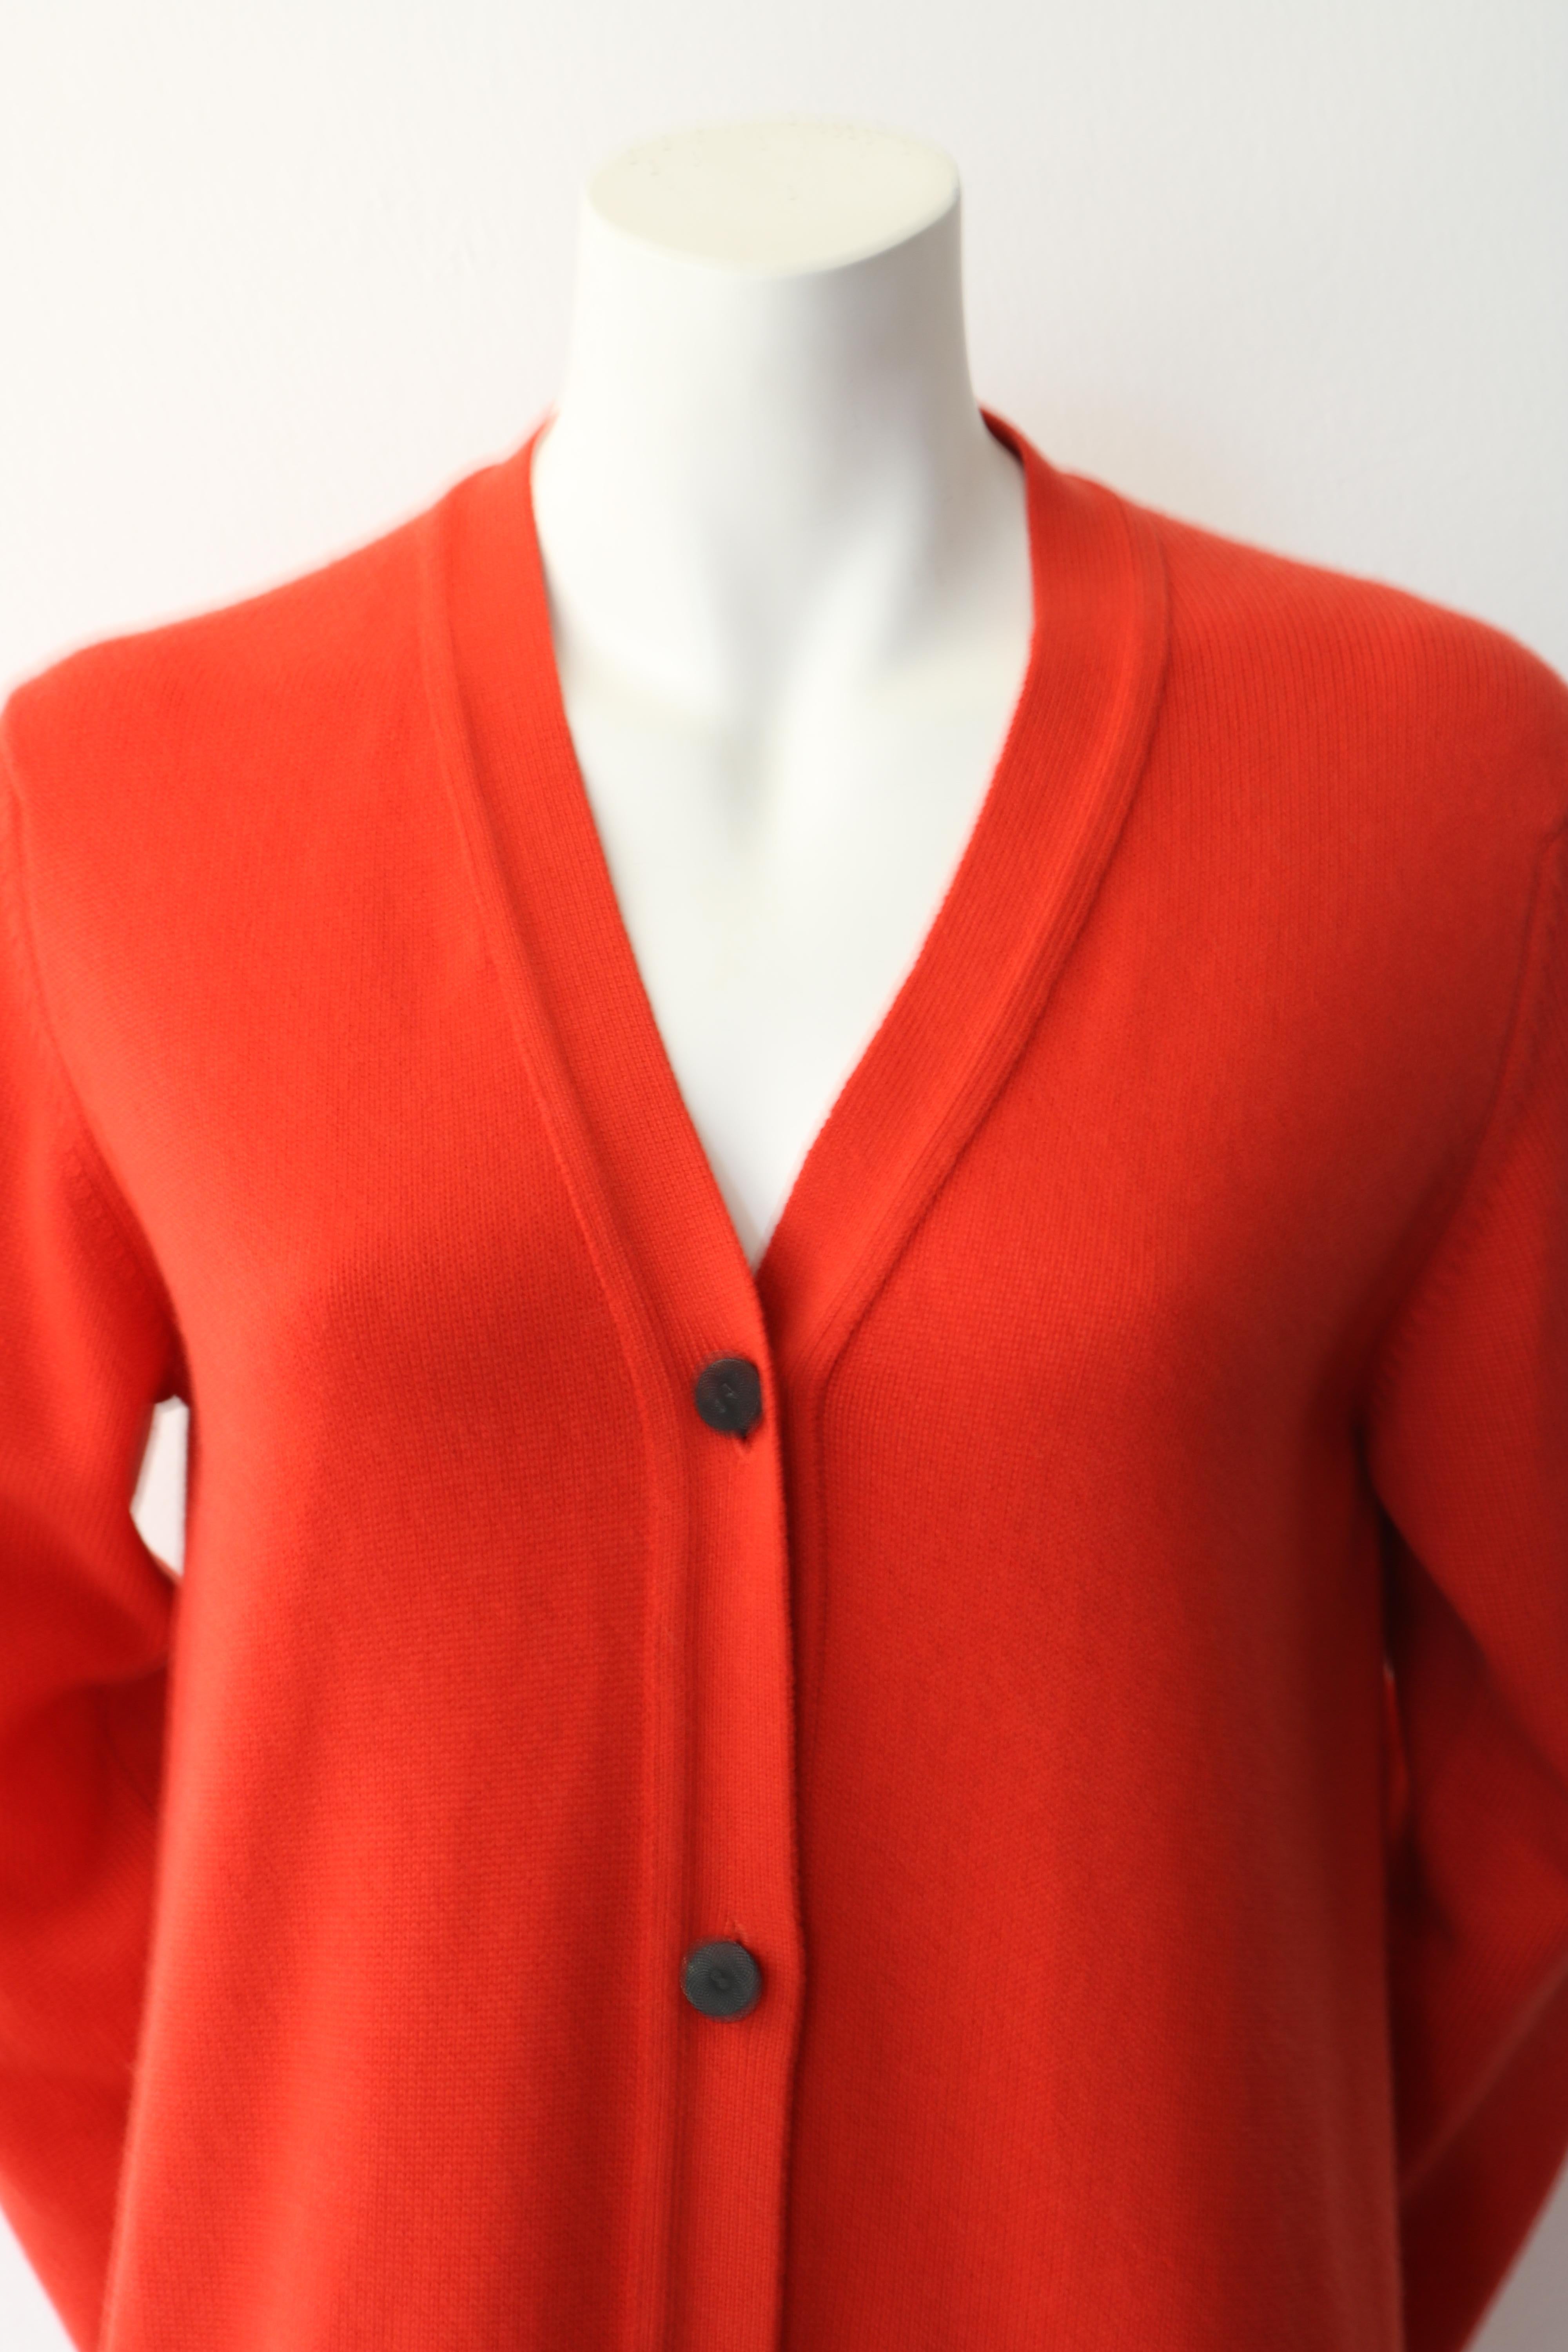 Beautiful Brand new orange Hermes cardigan. 
-Size 40 
-100% Cashmere 
-Pockets in the front 
-Tags Still attached
- Retailed for over $3500
- Mint Condition